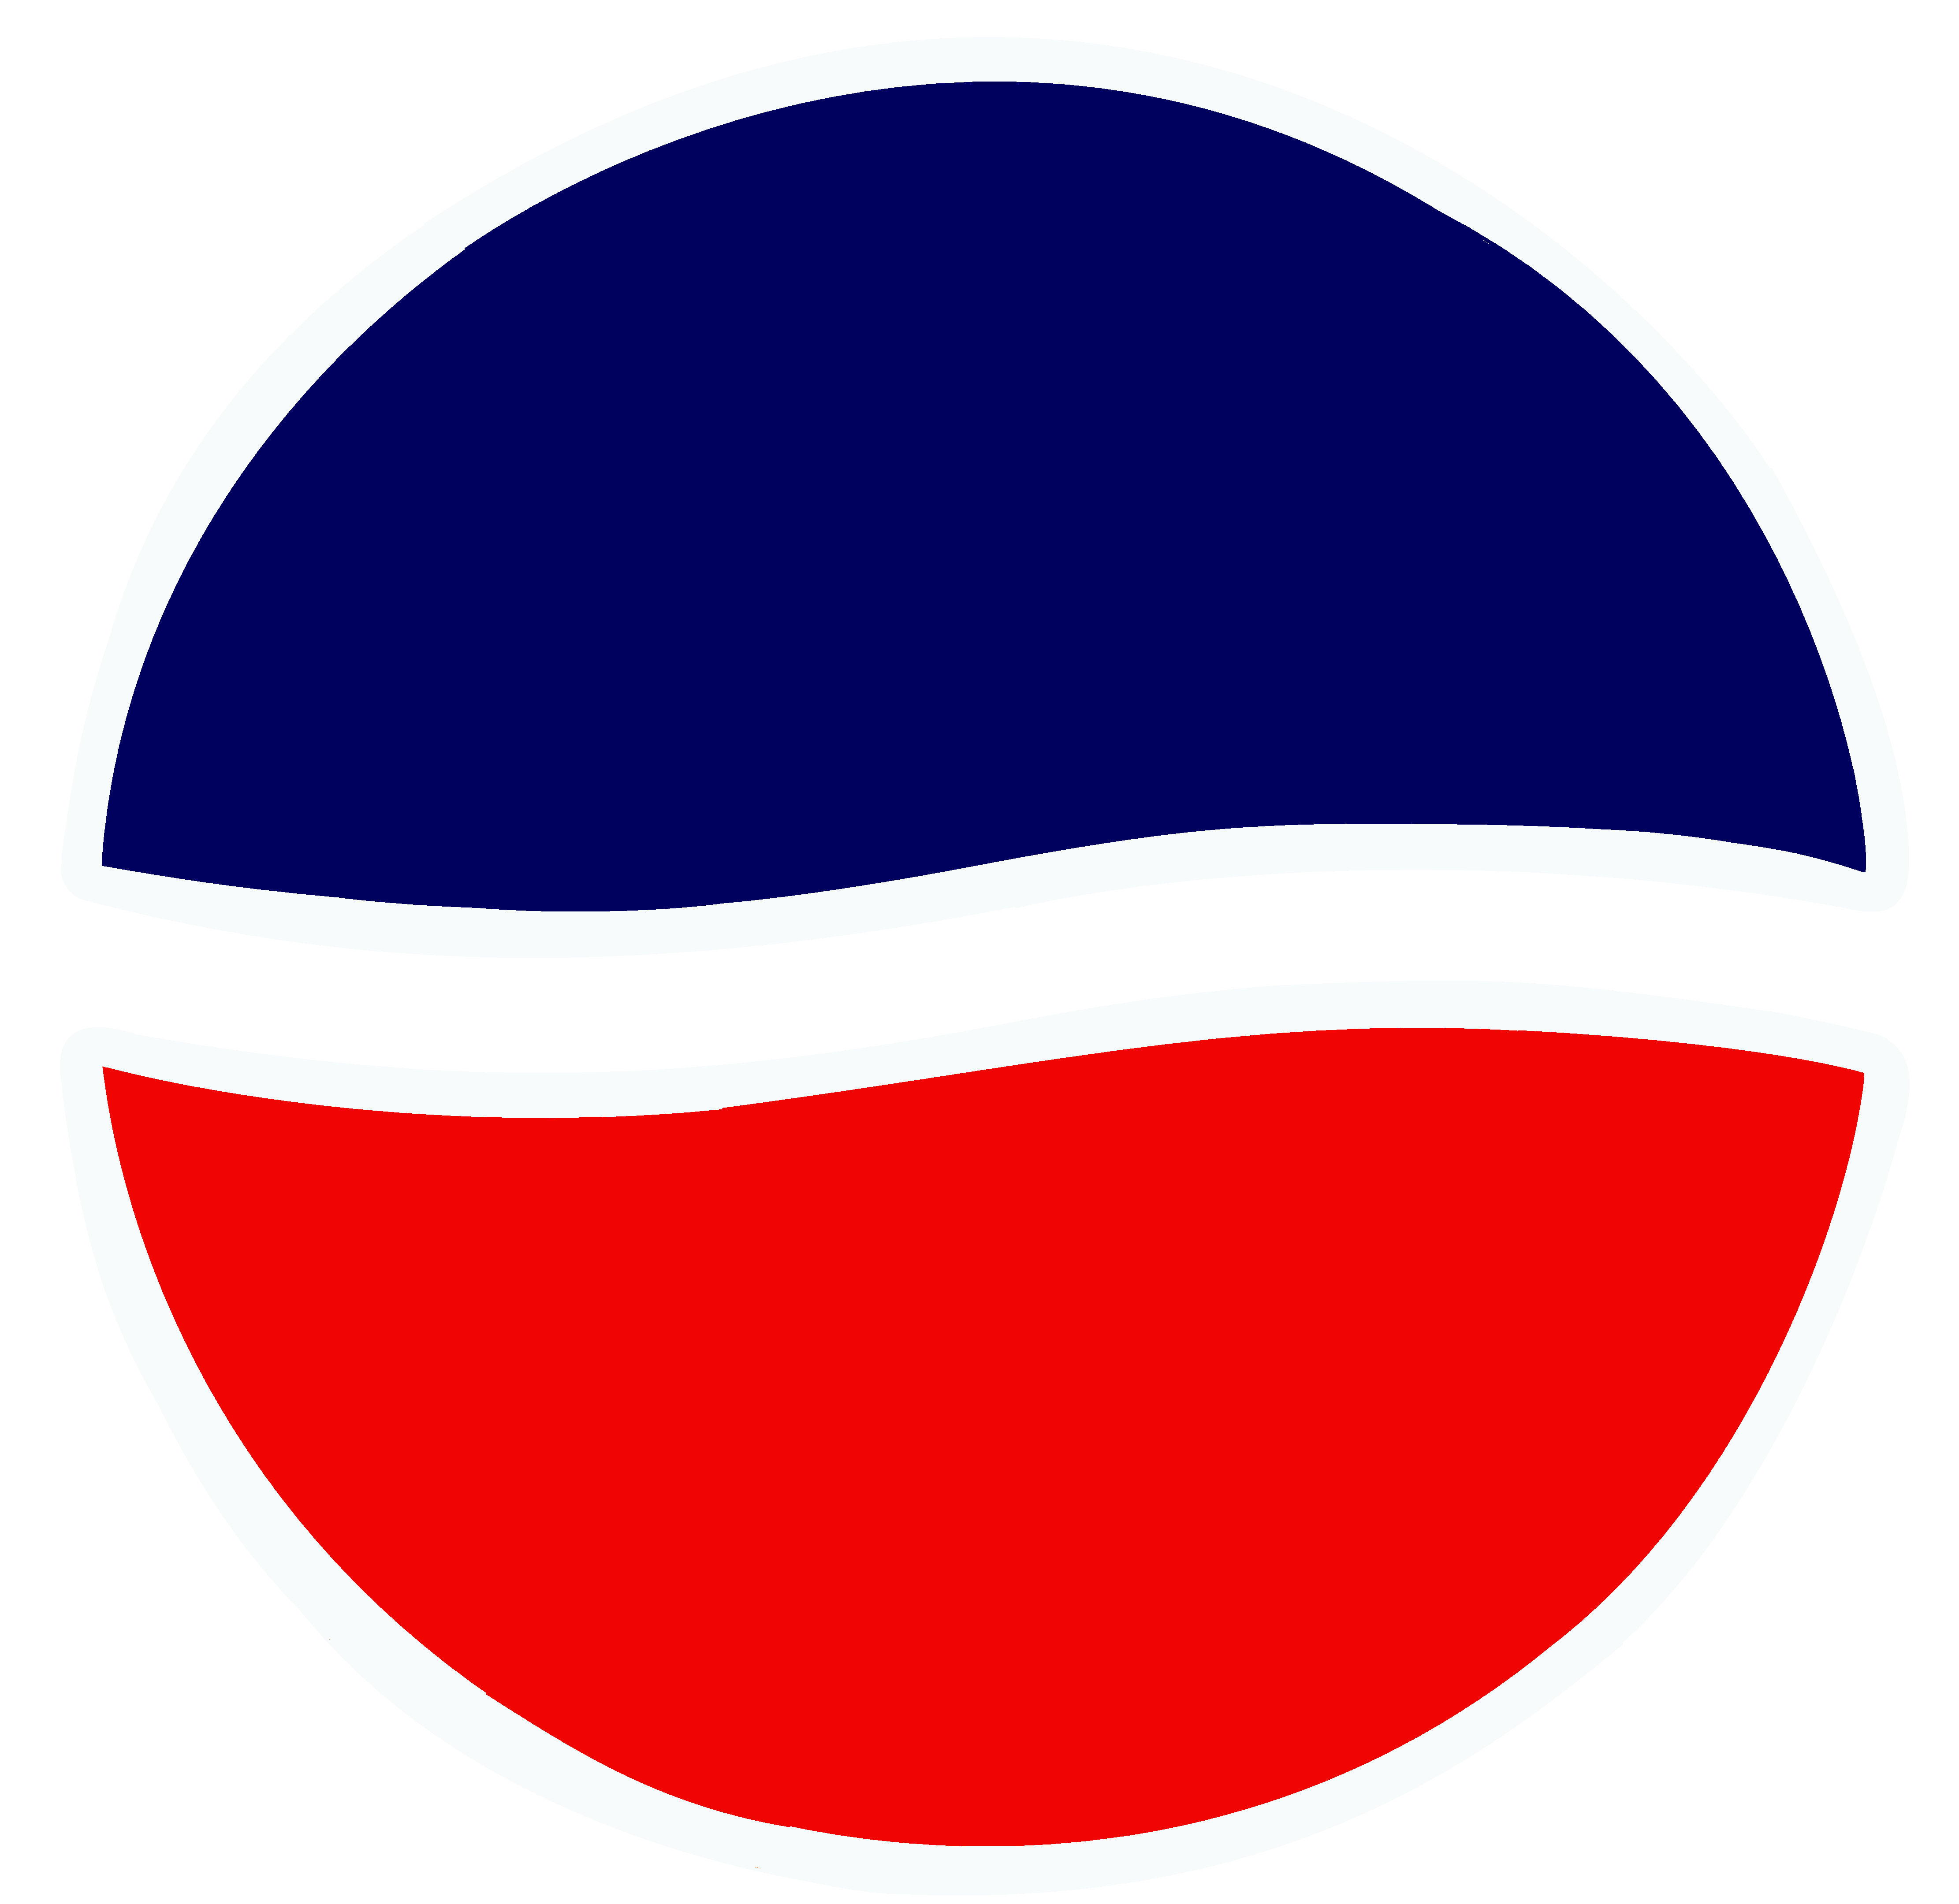 old classical pepsi logo(for MacMachine95)